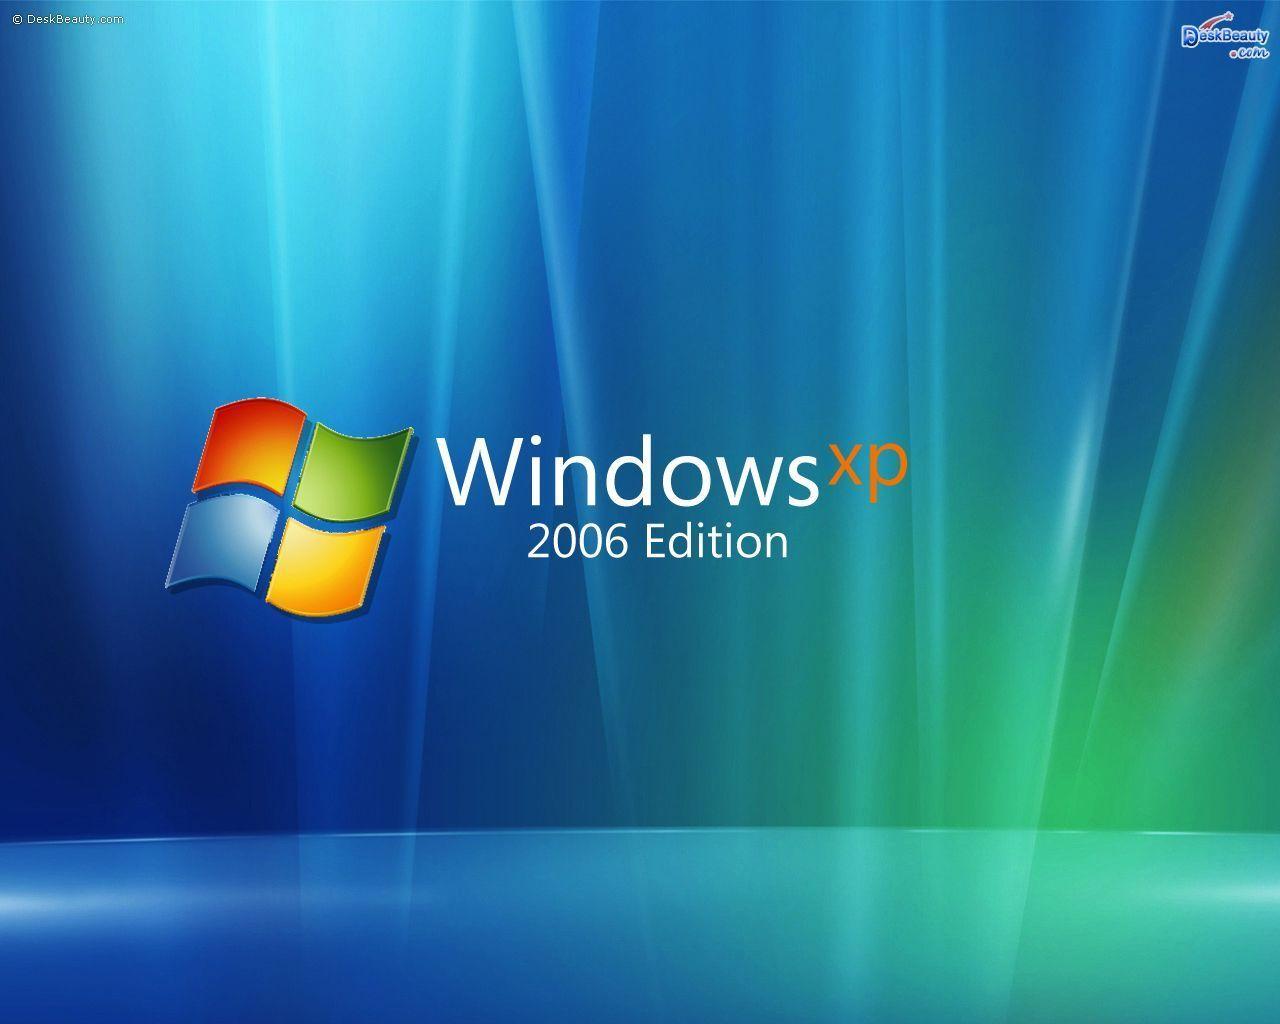 Wallpapers For > Windows Xp Professional Wallpapers